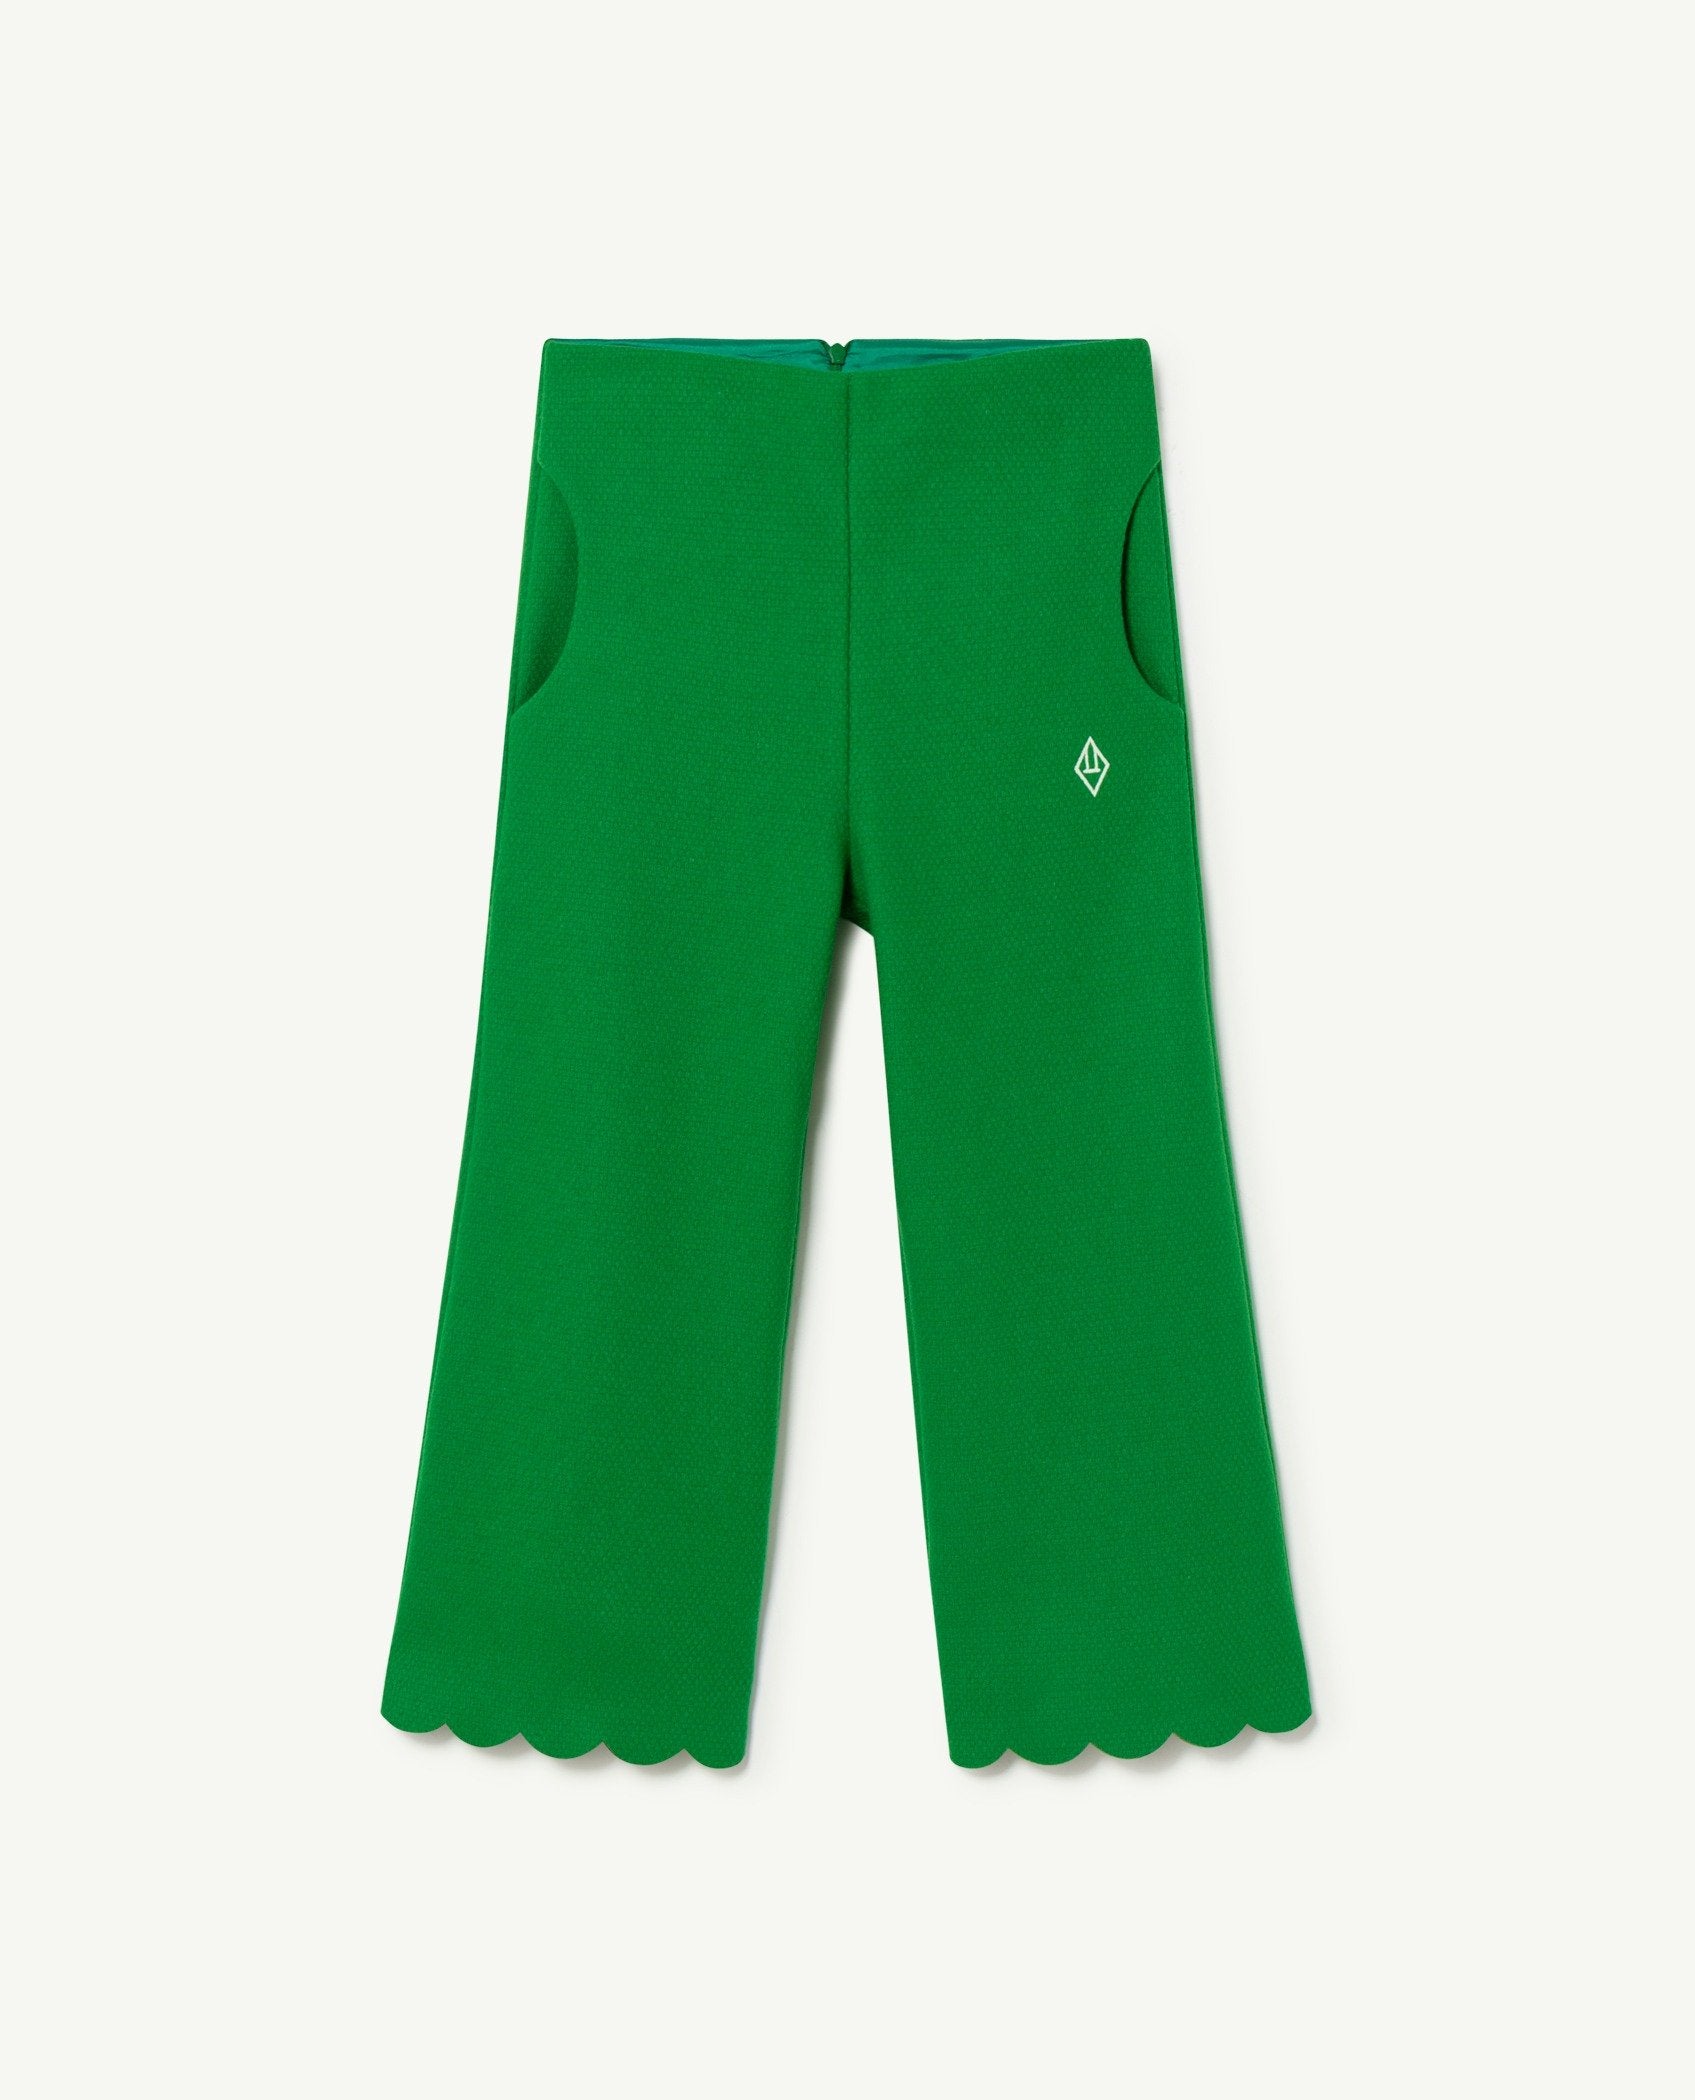 Green Rhino Kids Pants PRODUCT FRONT